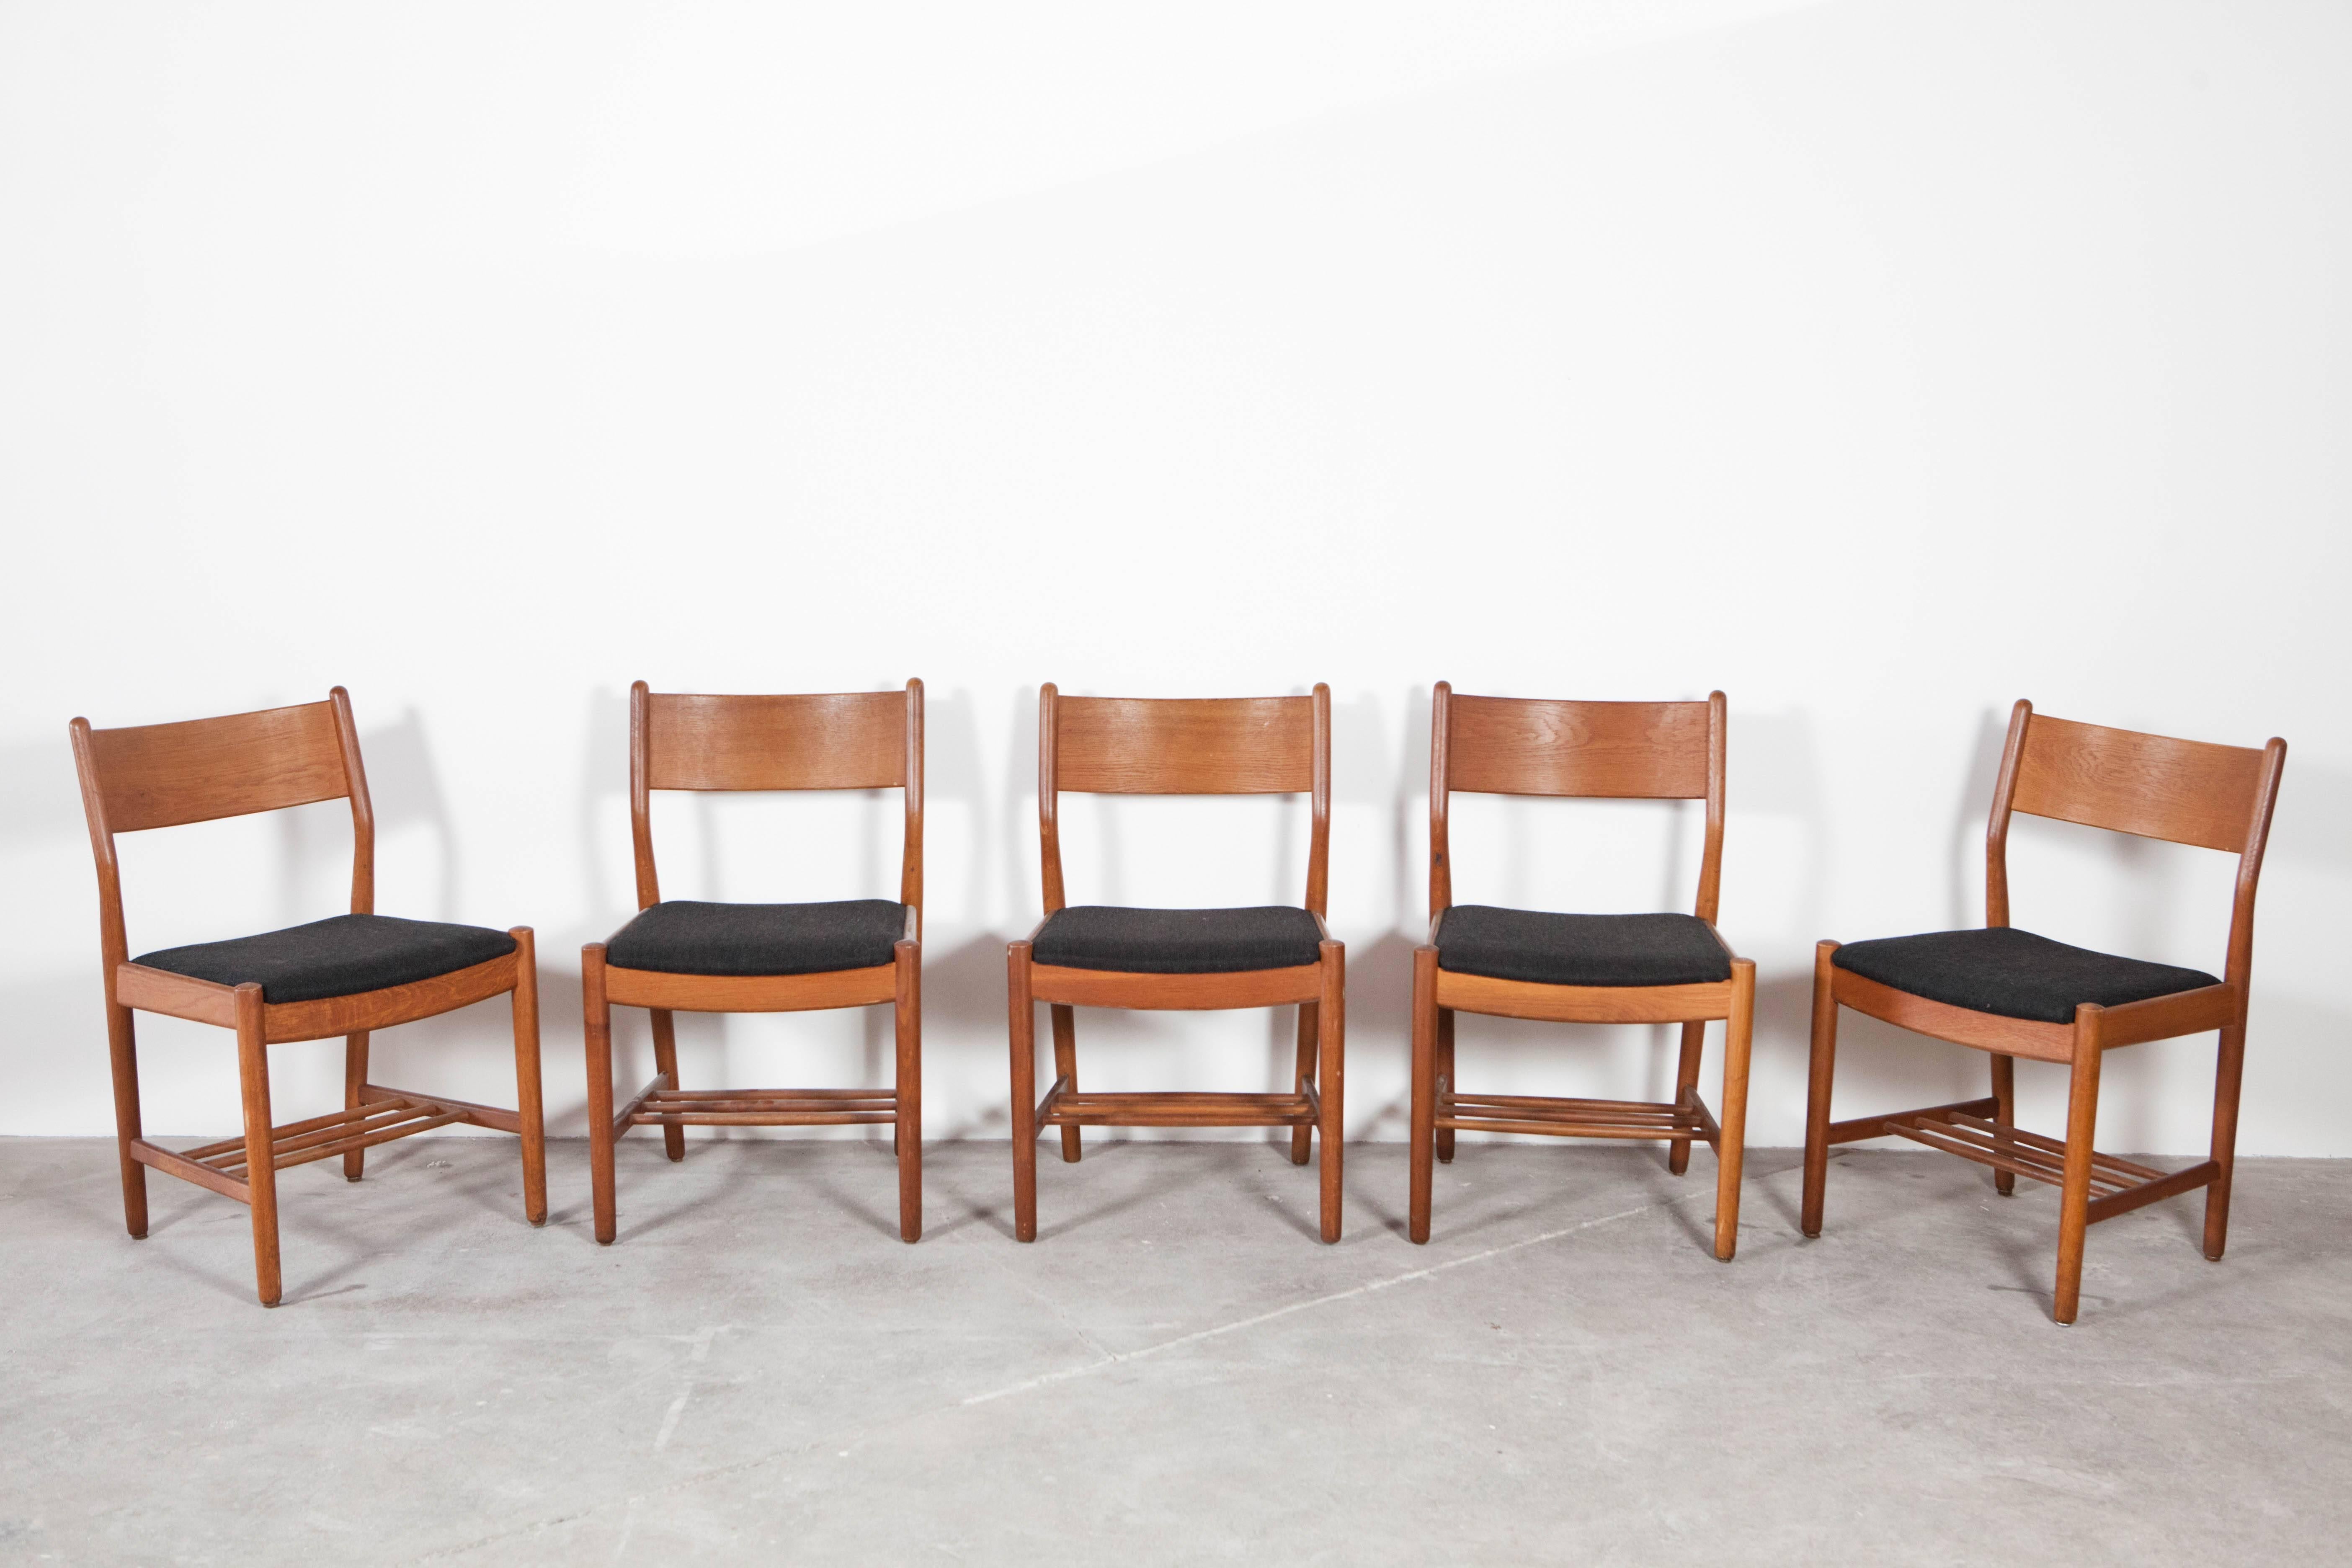 10 dining side chairs with black fabric by Borge Mogensen.